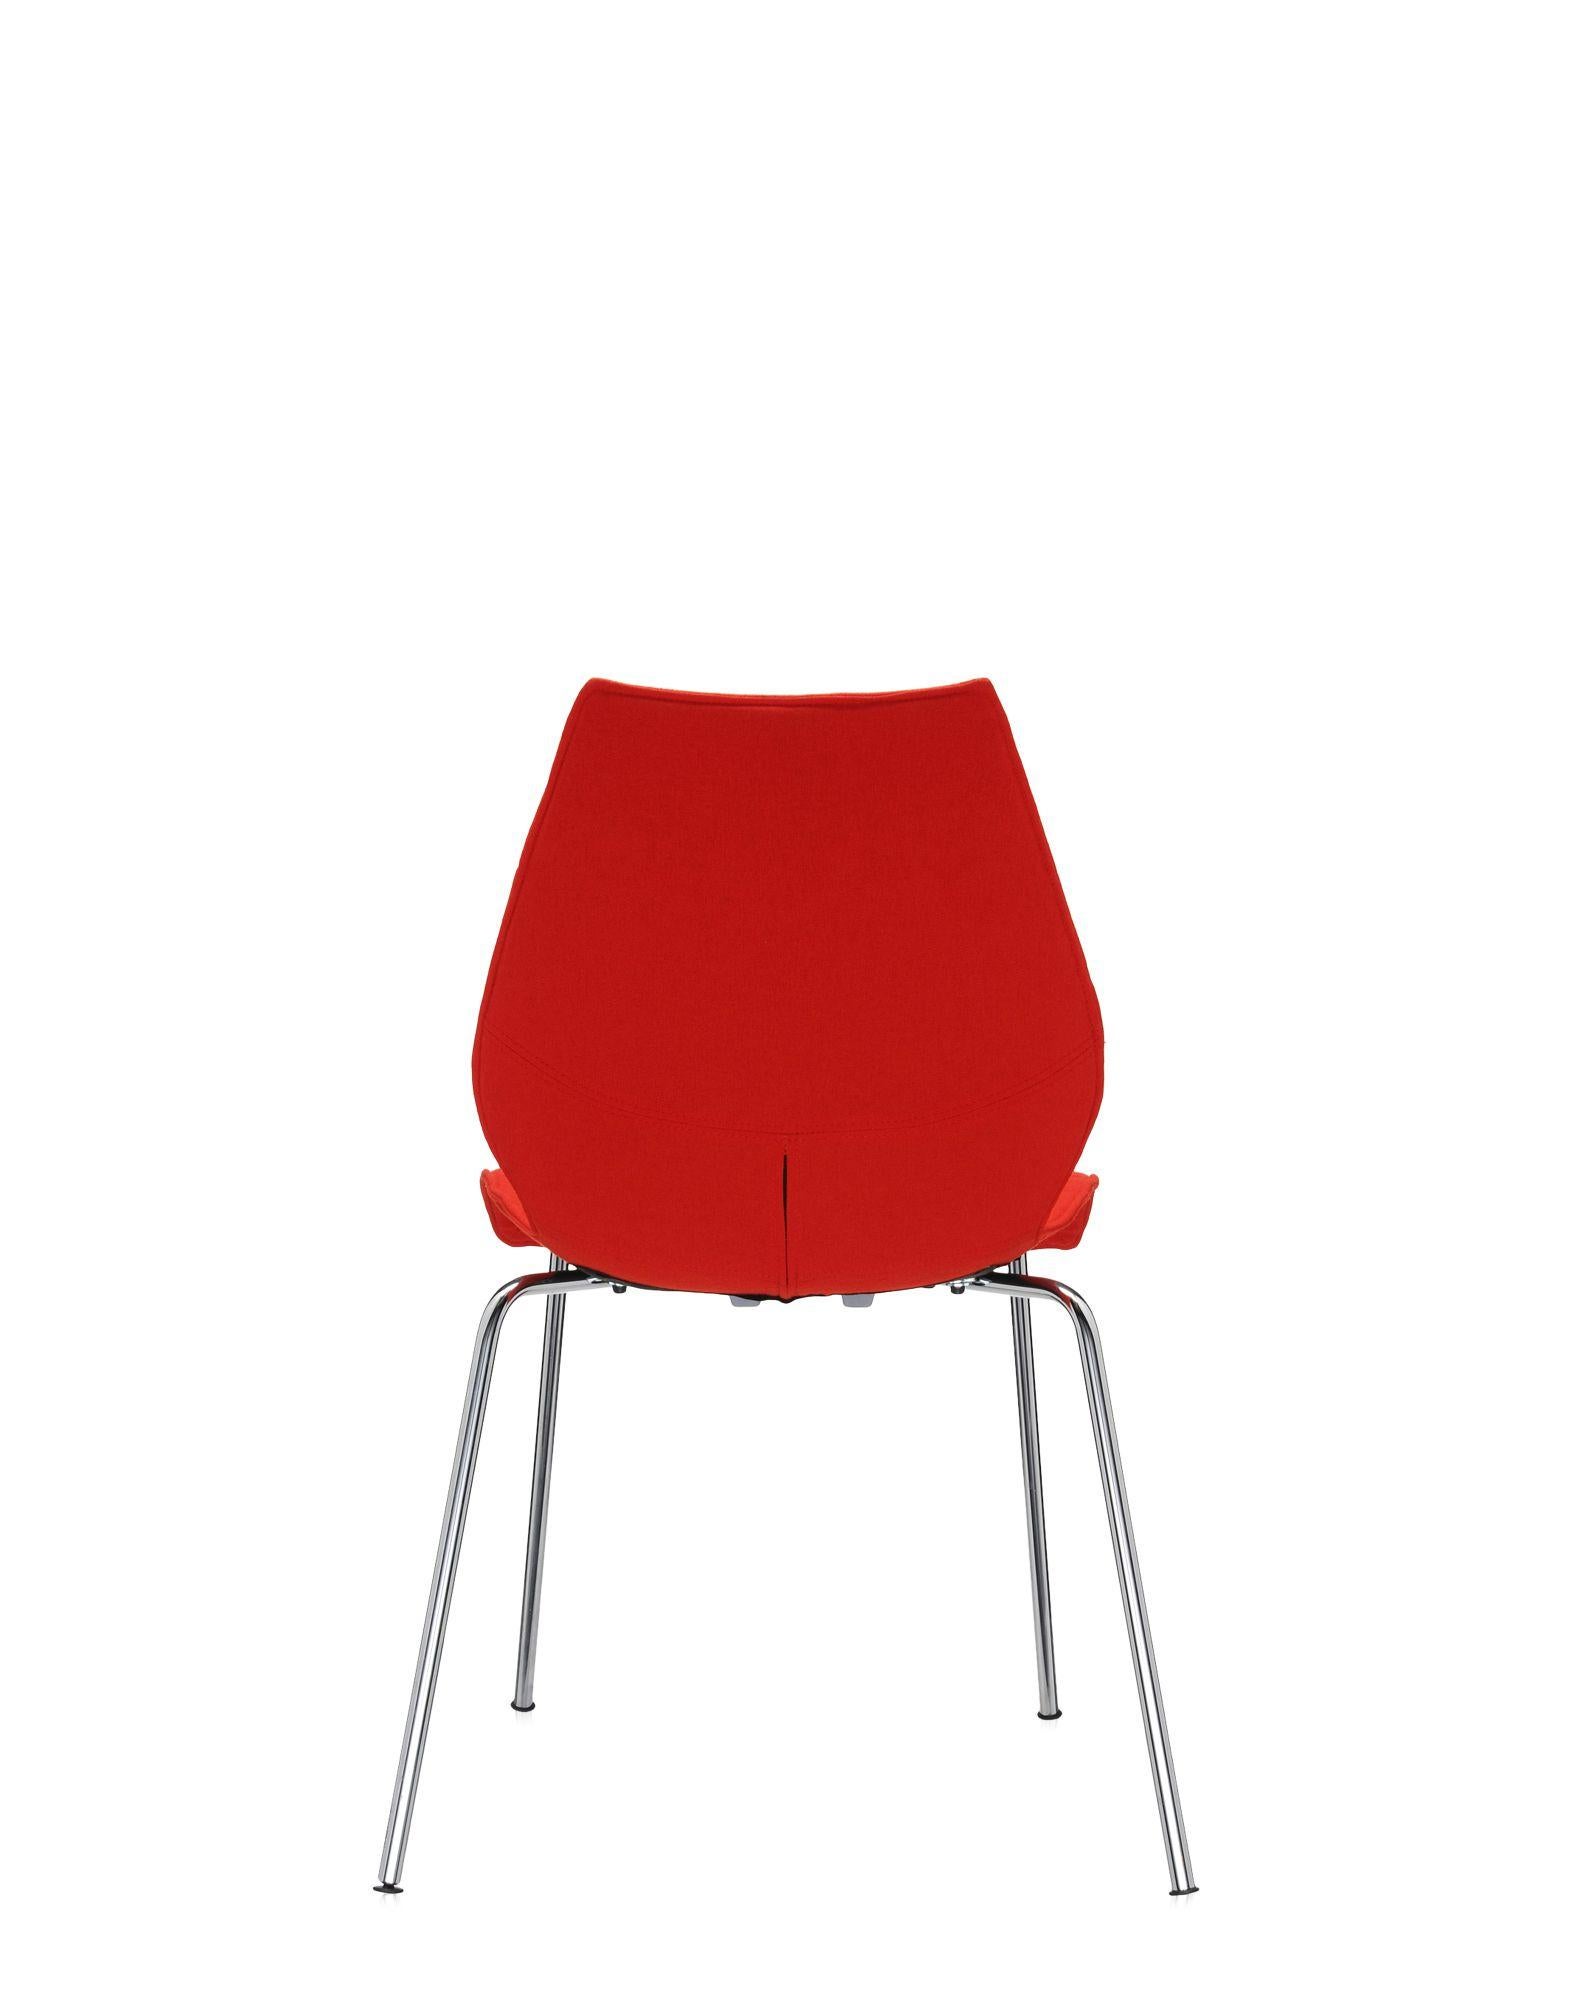 Italian Set of 2 Kartell Maui Soft Trevira Chair in Red by Vico Magistretti